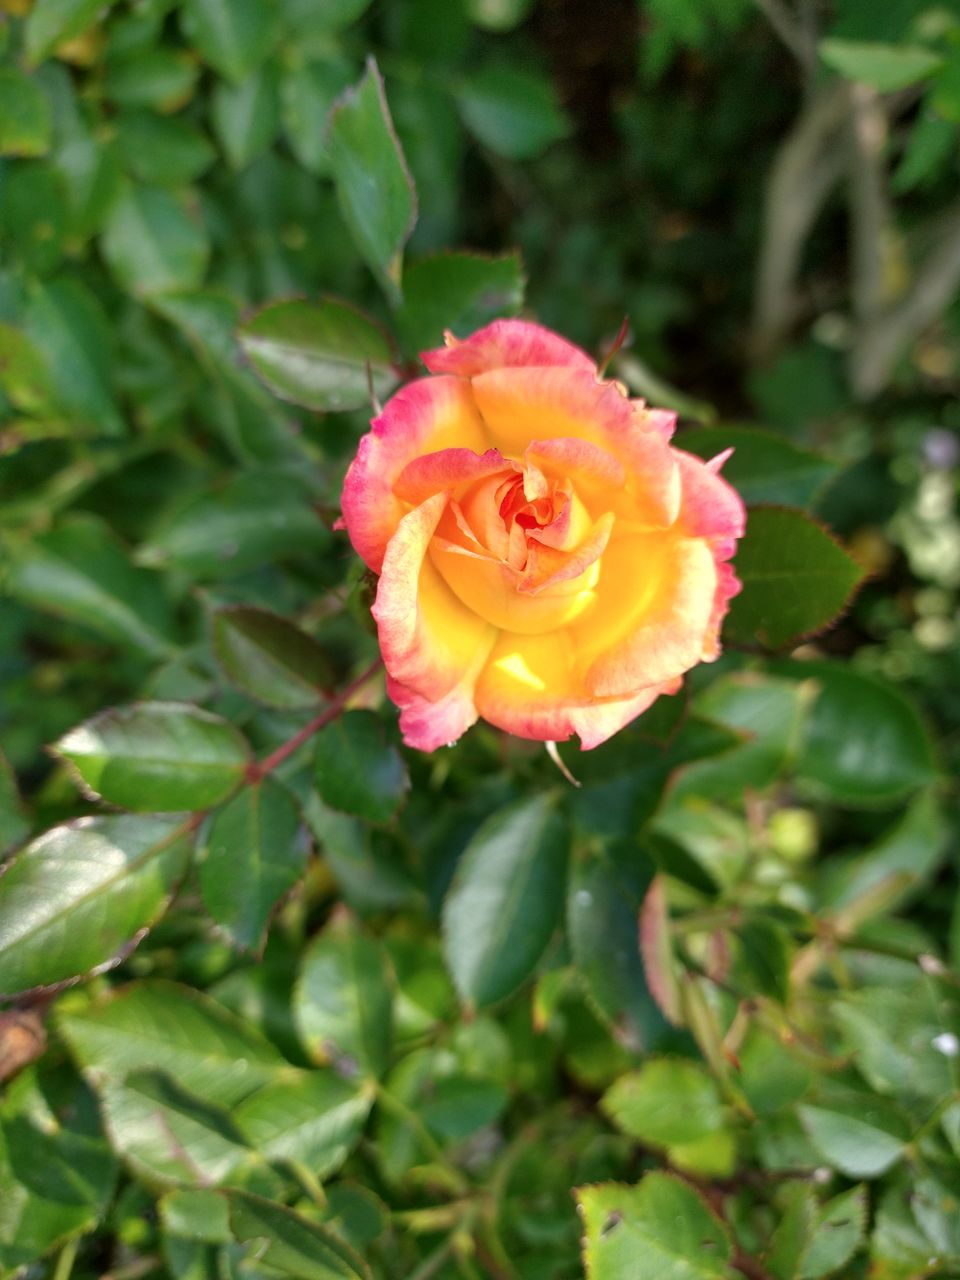 CLOSE-UP OF ROSE BUD IN BLOOM